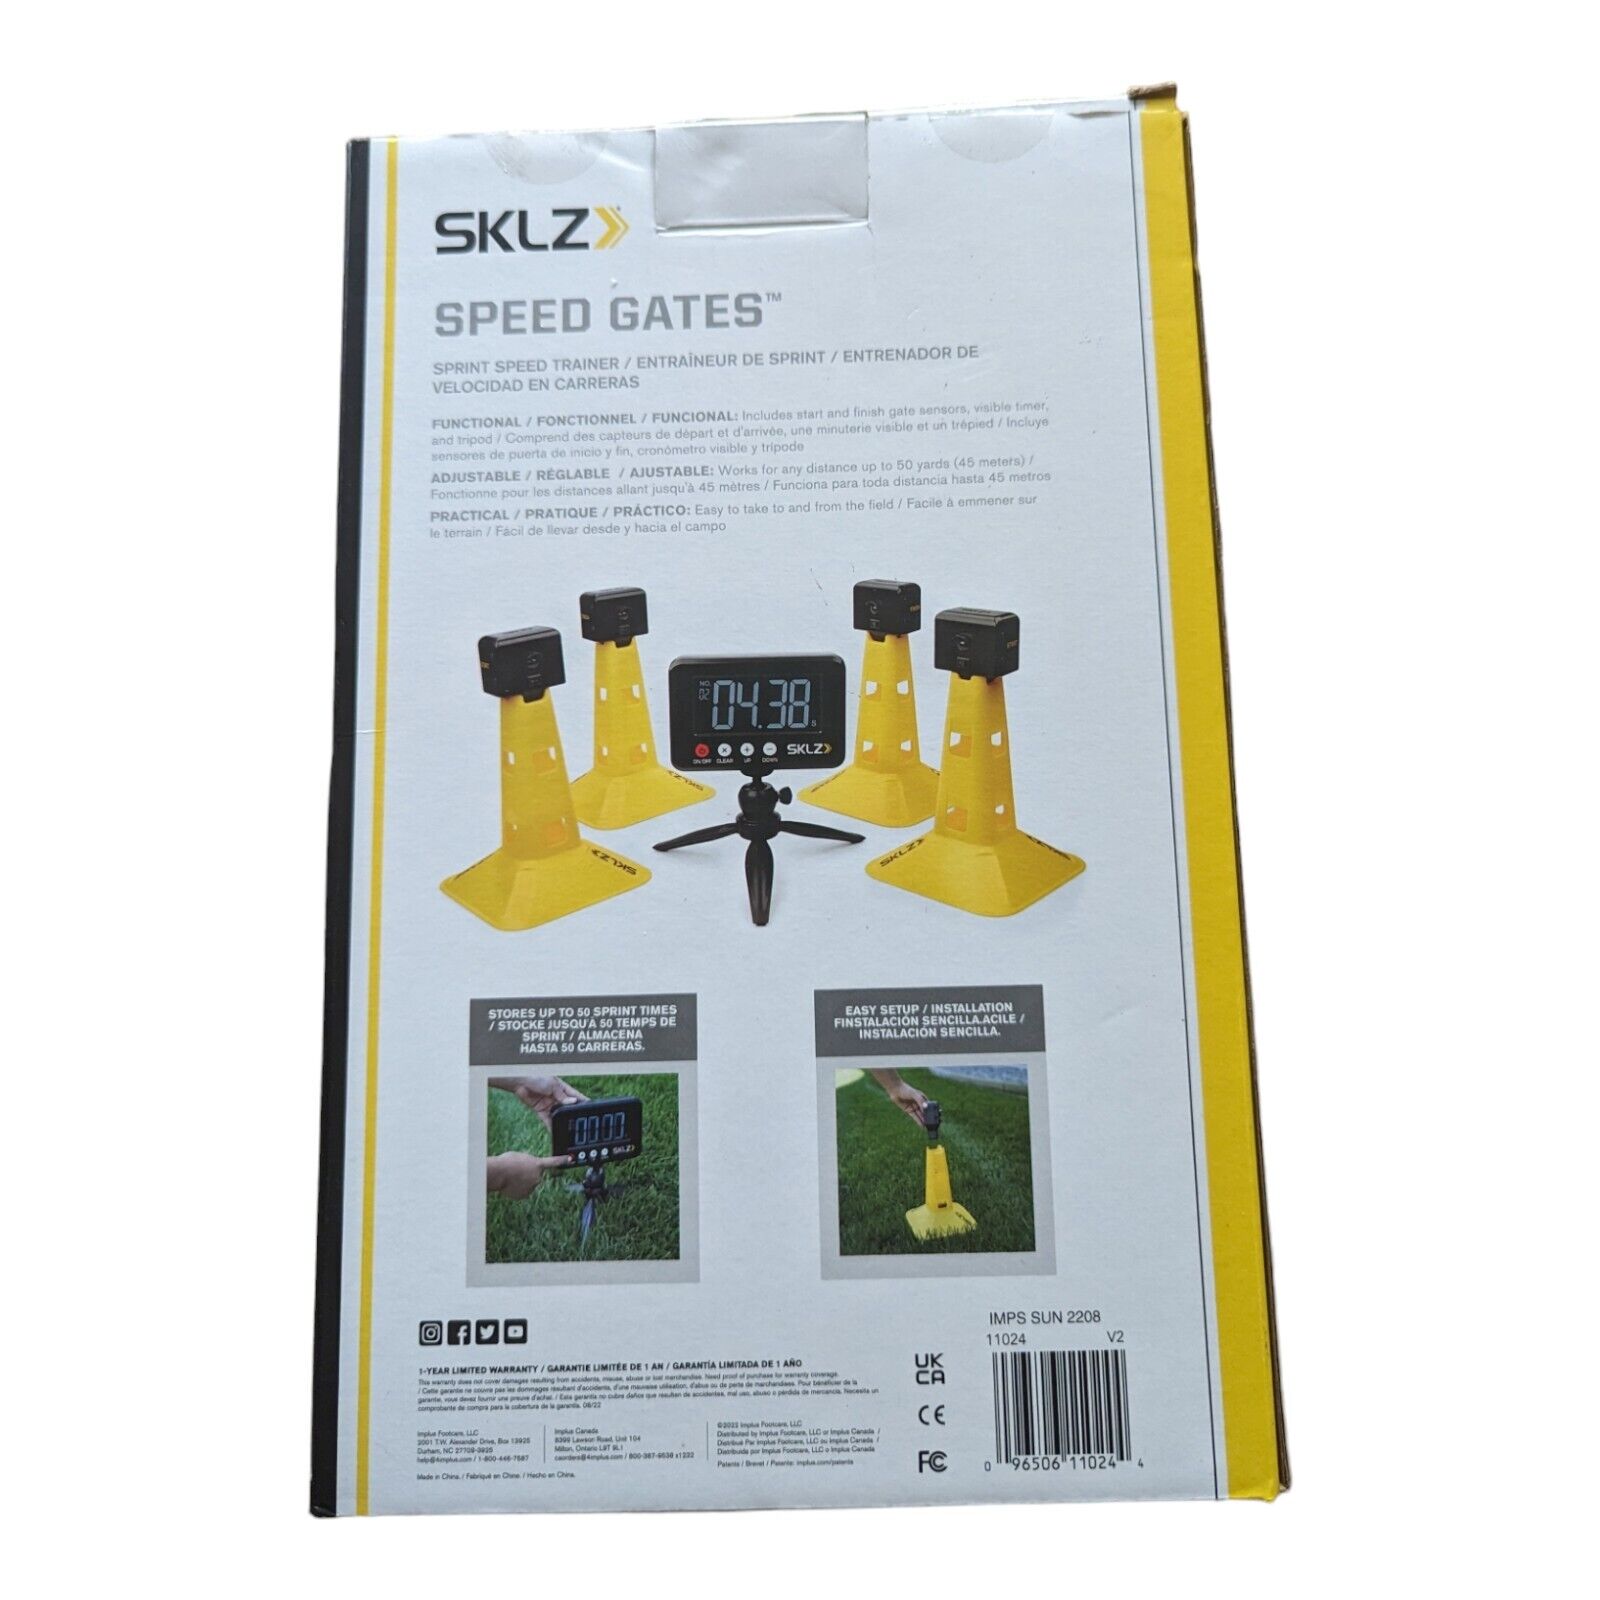 SKLZ Speed Gates for Sports and Athletic Speed Training, yellow